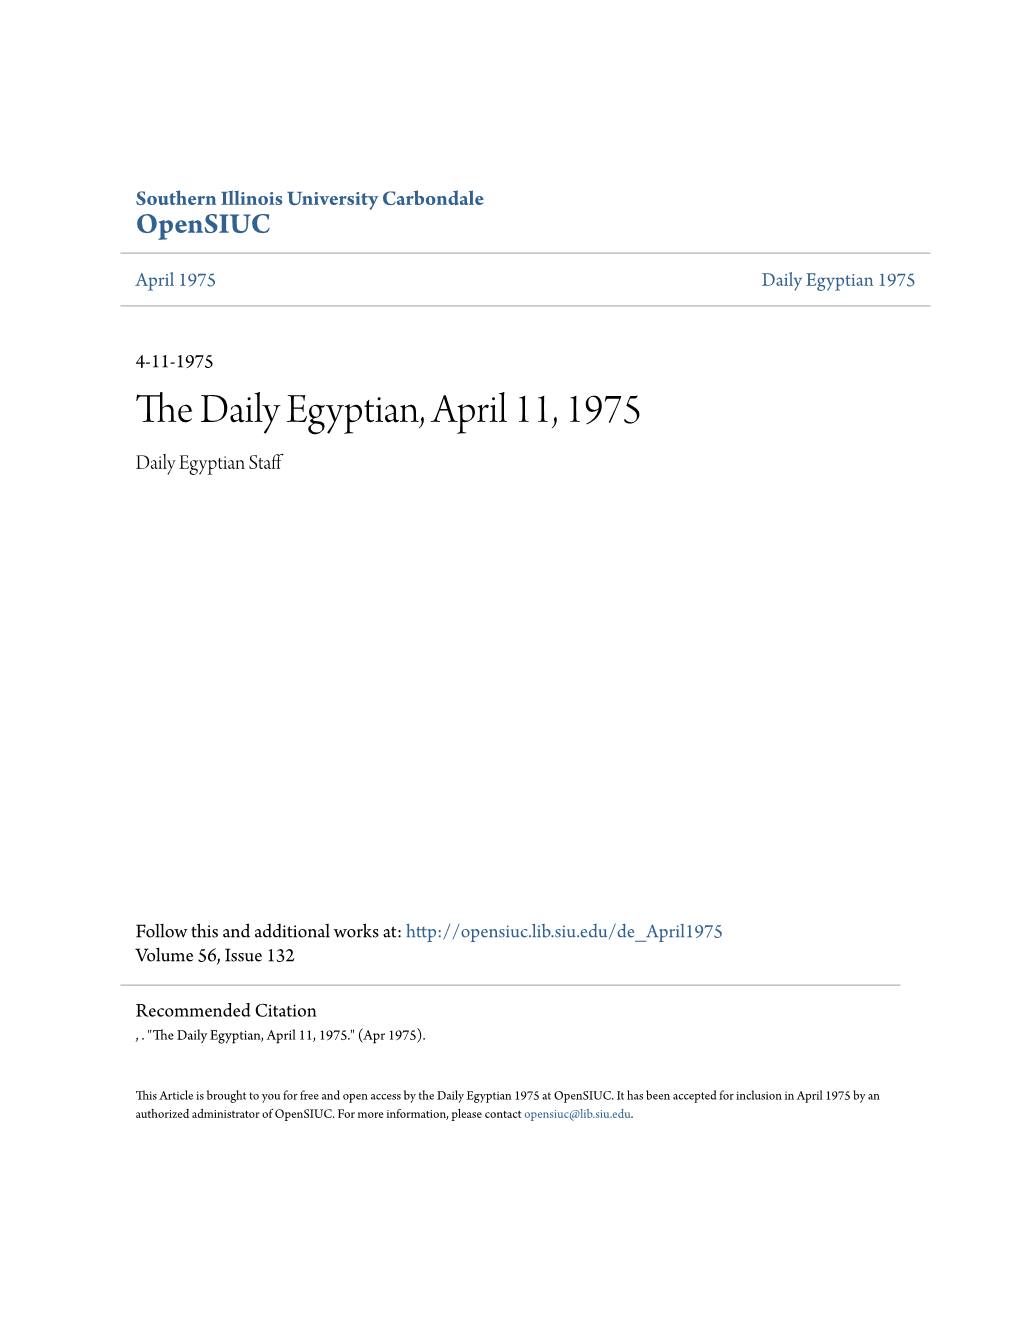 The Daily Egyptian, April 11, 1975